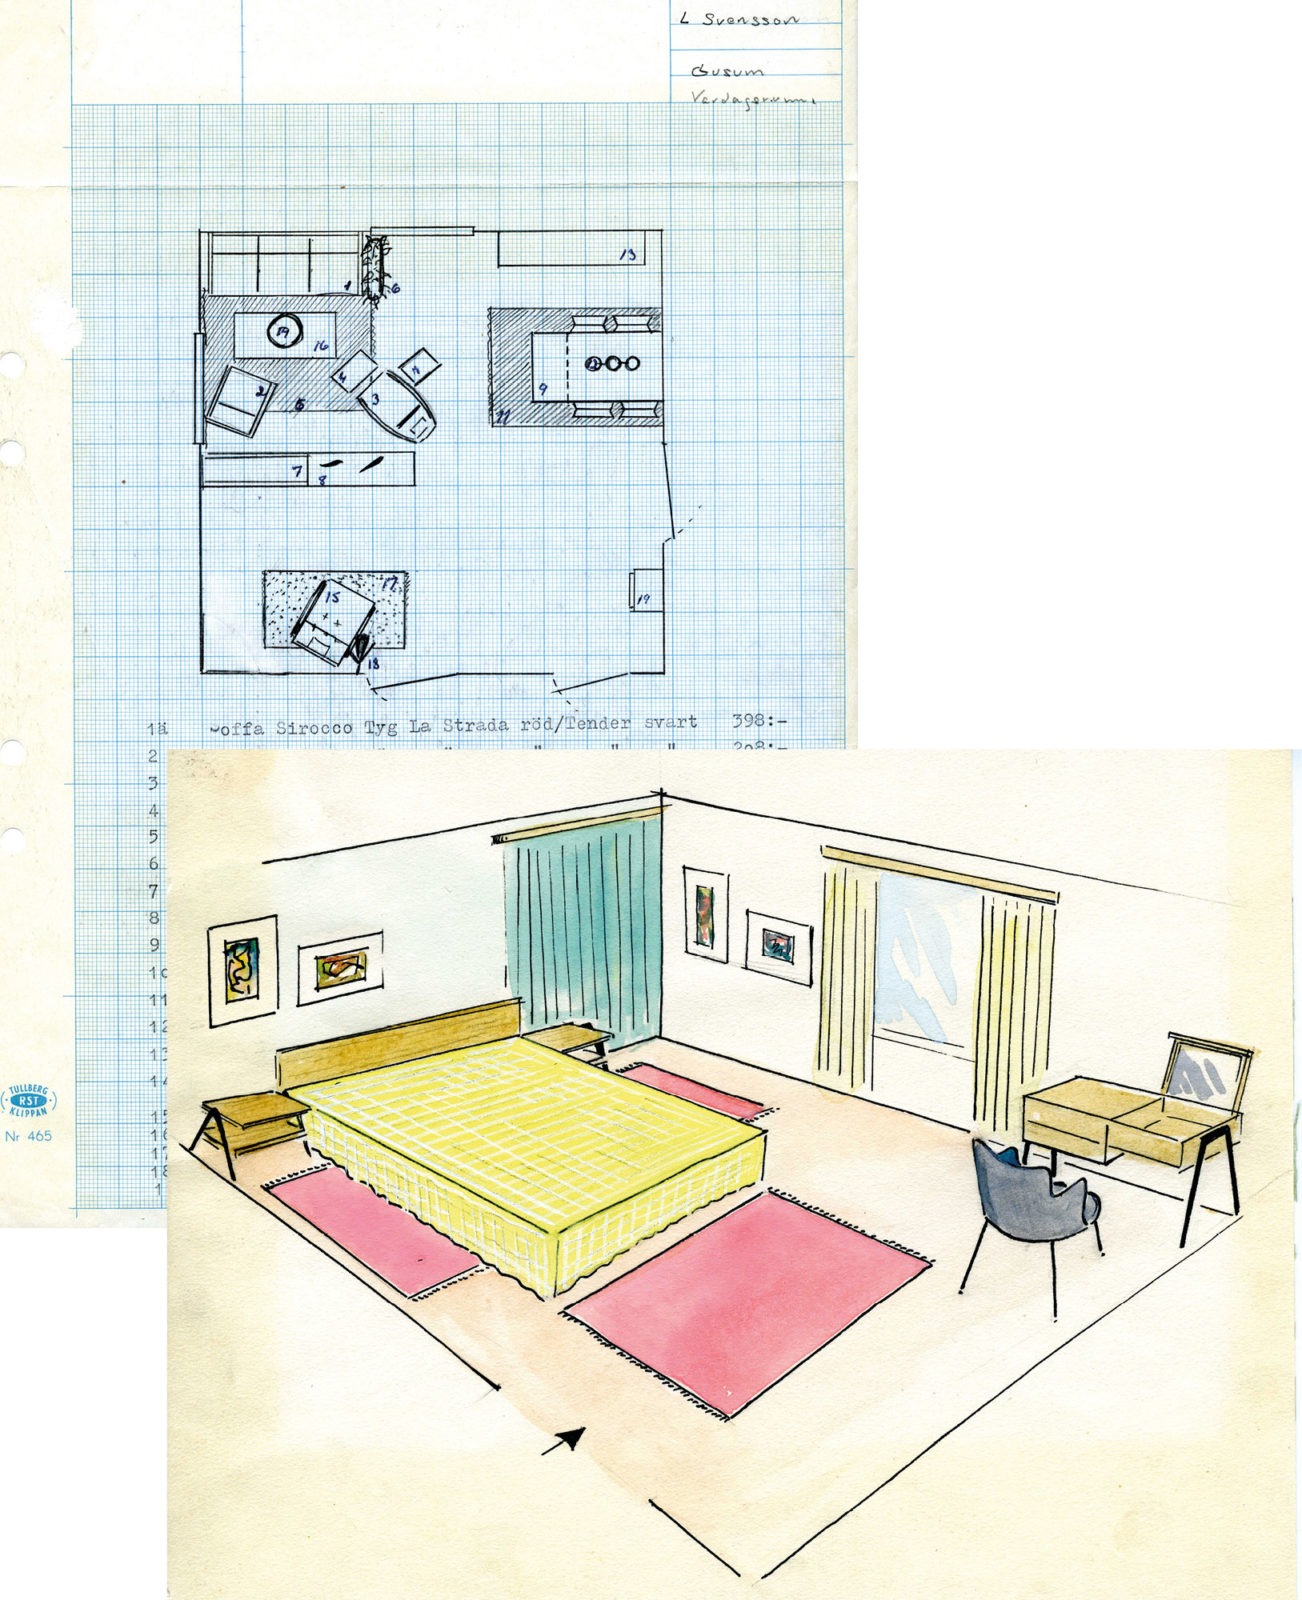 Interior design sketch with list of furnishings and cost. Also, interior watercolour of bedroom in modern 1950s style.